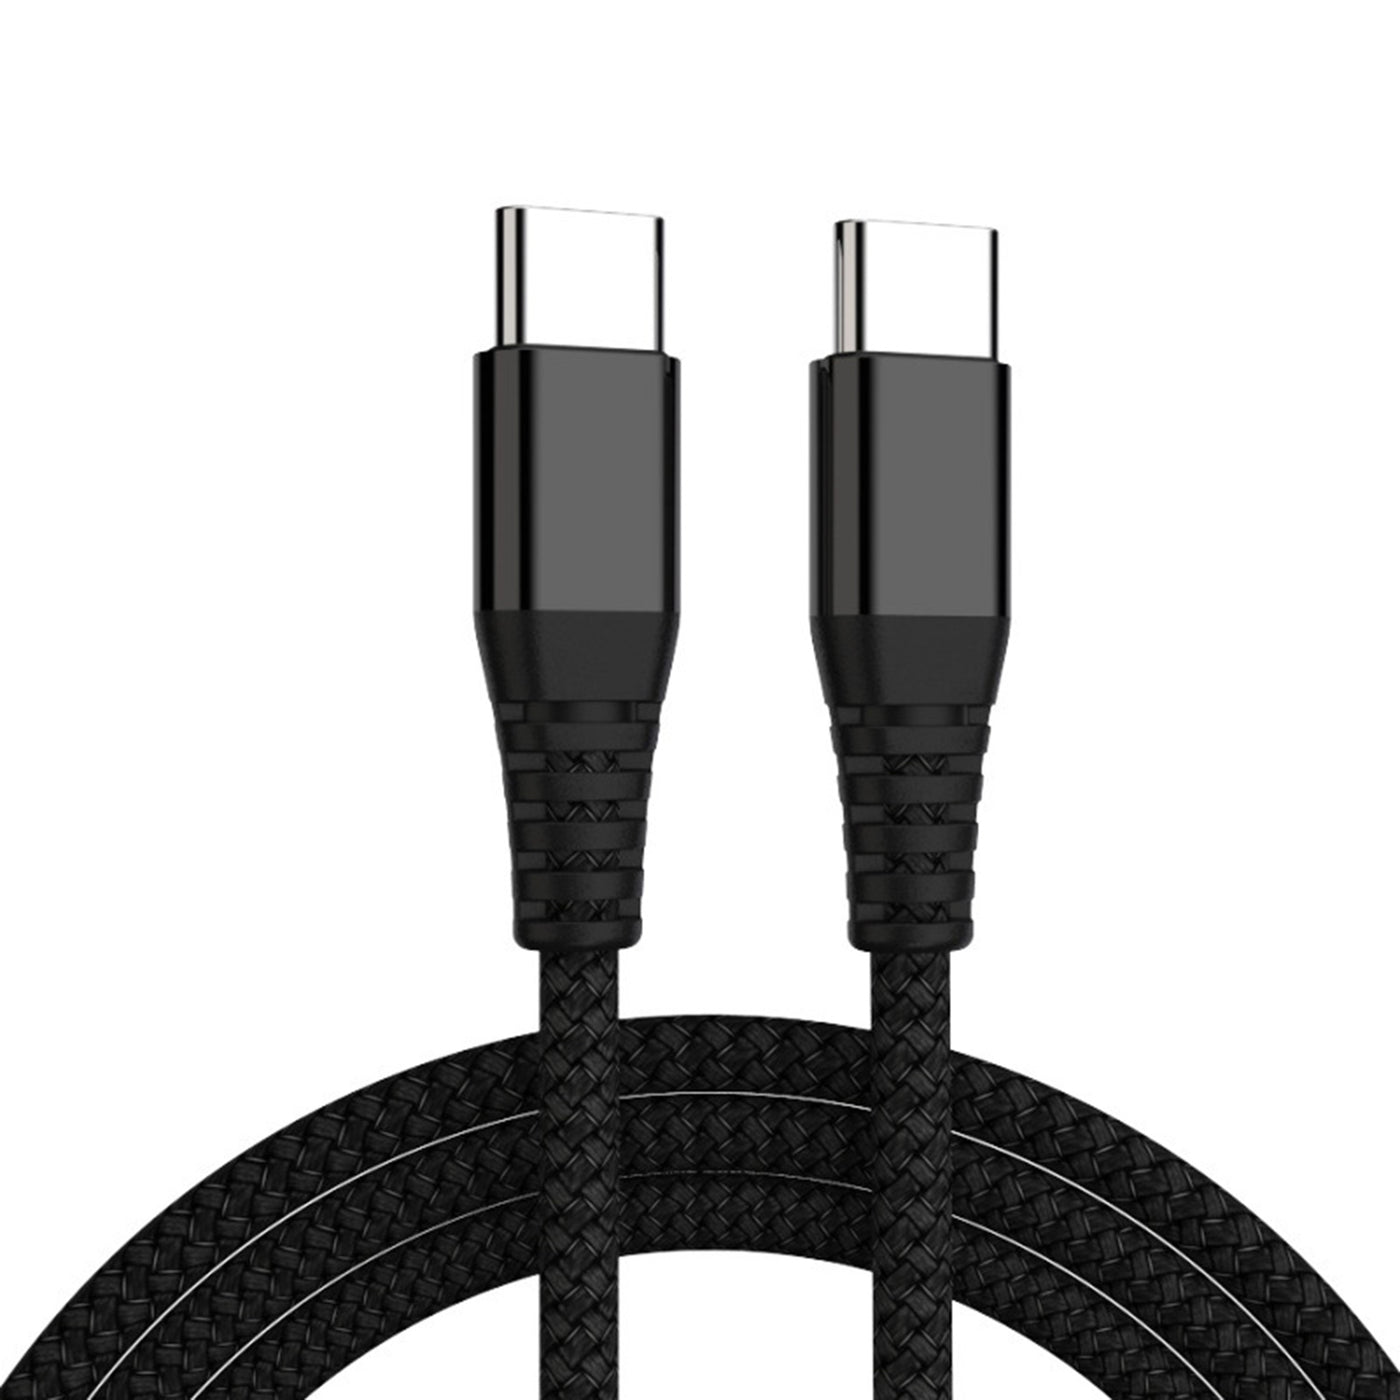 60W USB-C to USB-C Cable with Data Transfer Transmission (5.9FT)